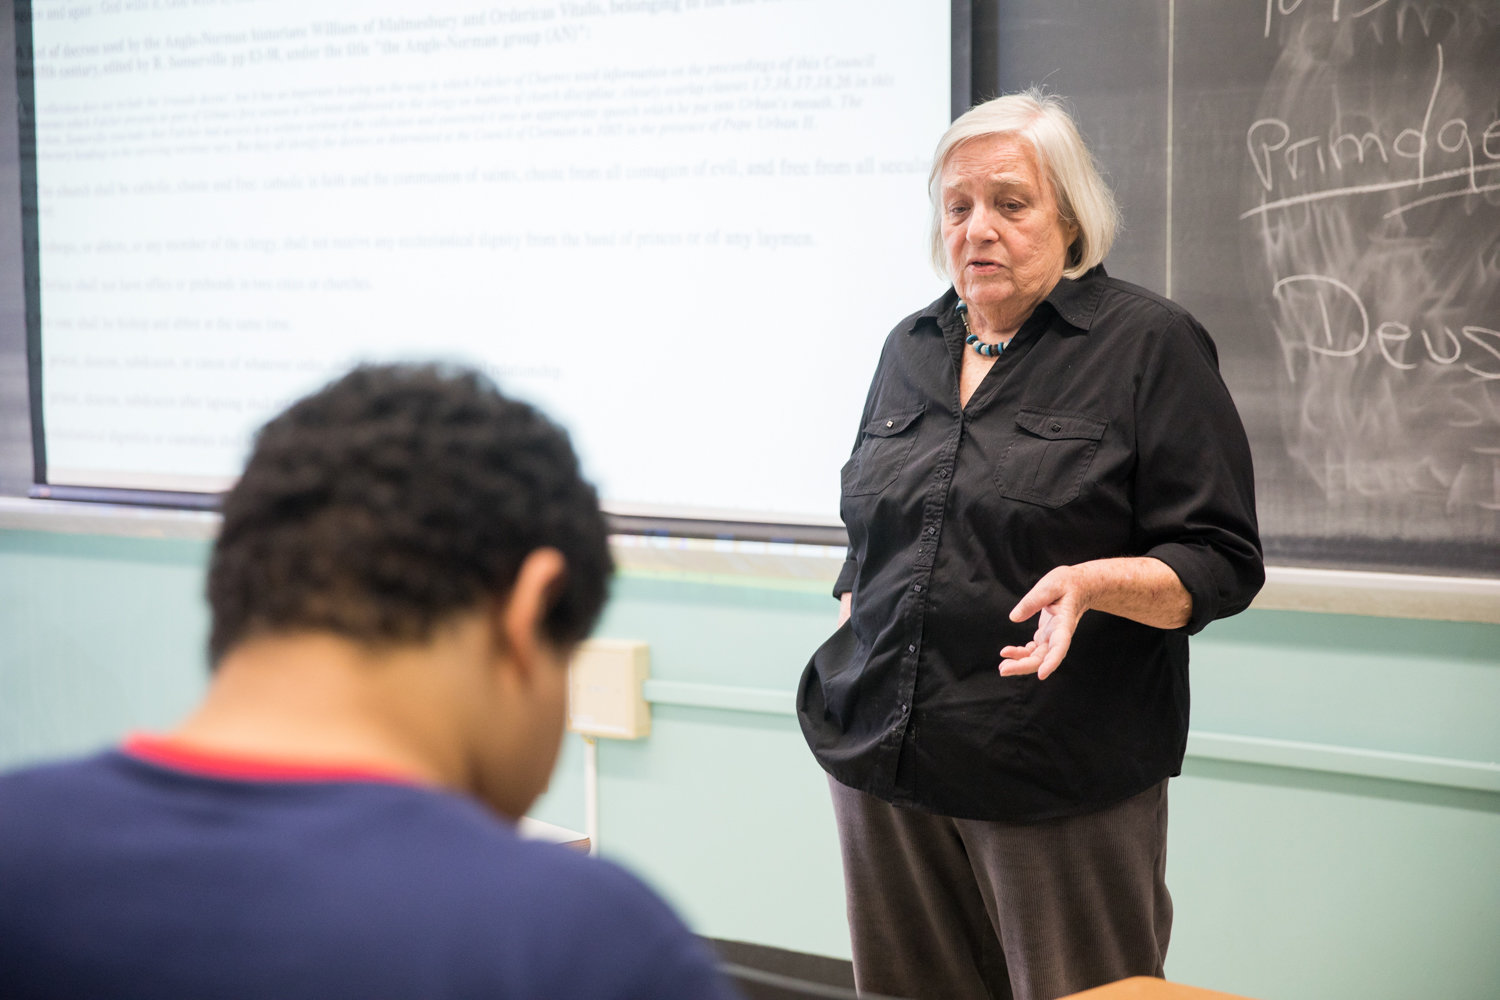 An adjunct professor at Lehman College, Diane Auslander talks with her students at the end of her medieval civilization class. Despite calls for a better contract, Auslander is voting yes on the proposed CUNY collective bargaining contract that exists now because there’s no guarantee protracted union negotiations would yield anything better.